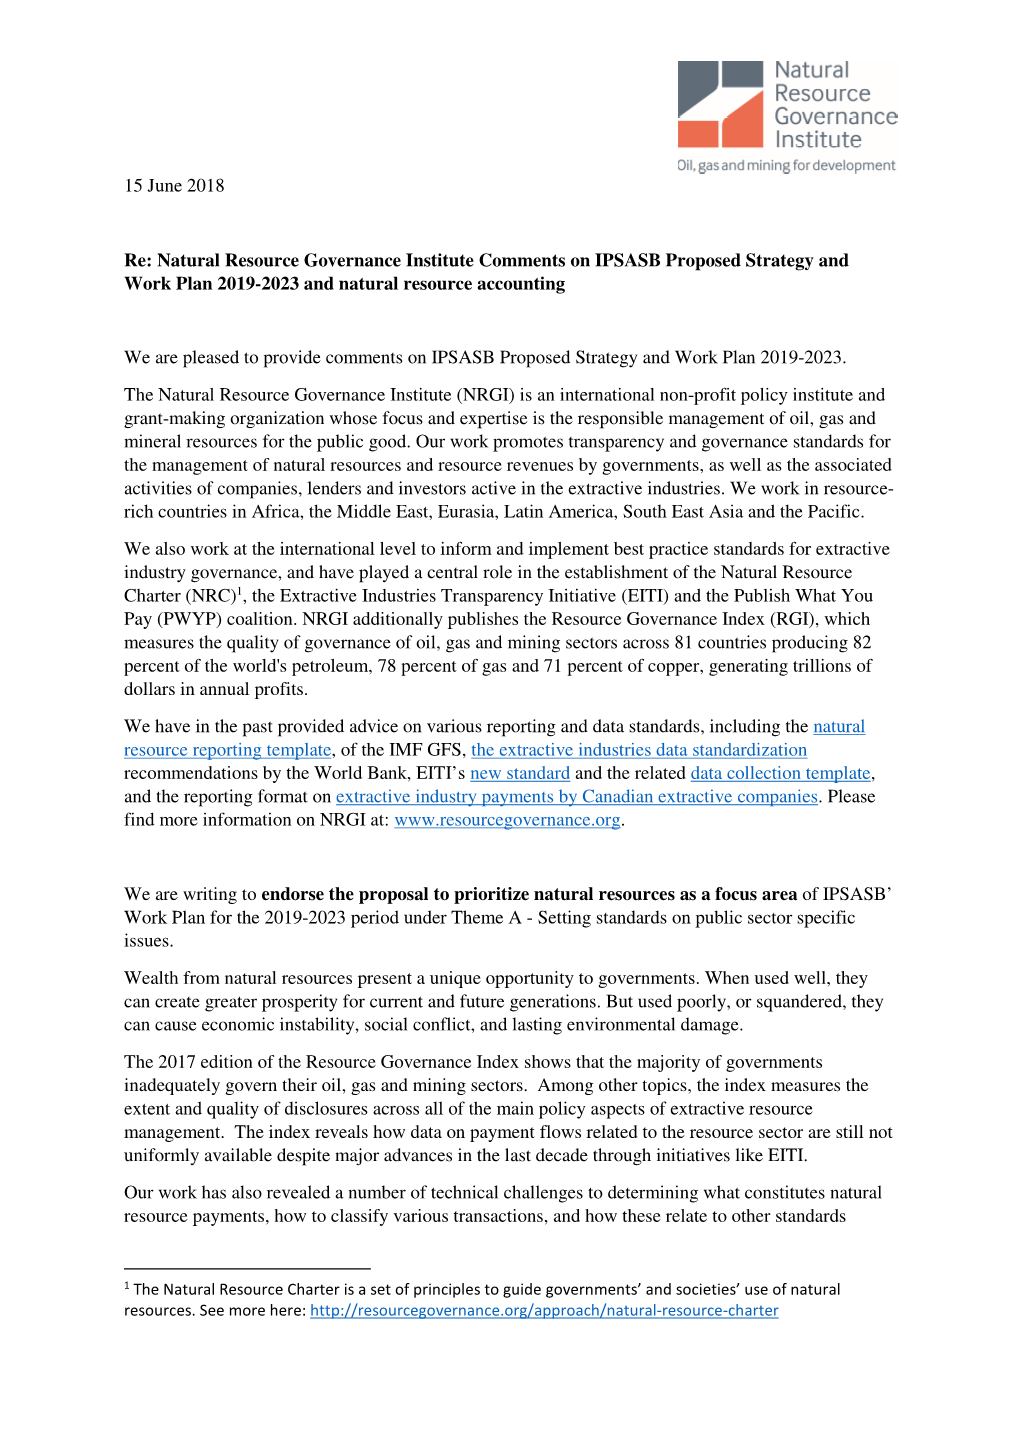 Natural Resource Governance Institute Comments on IPSASB Proposed Strategy and Work Plan 2019-2023 and Natural Resource Accounting